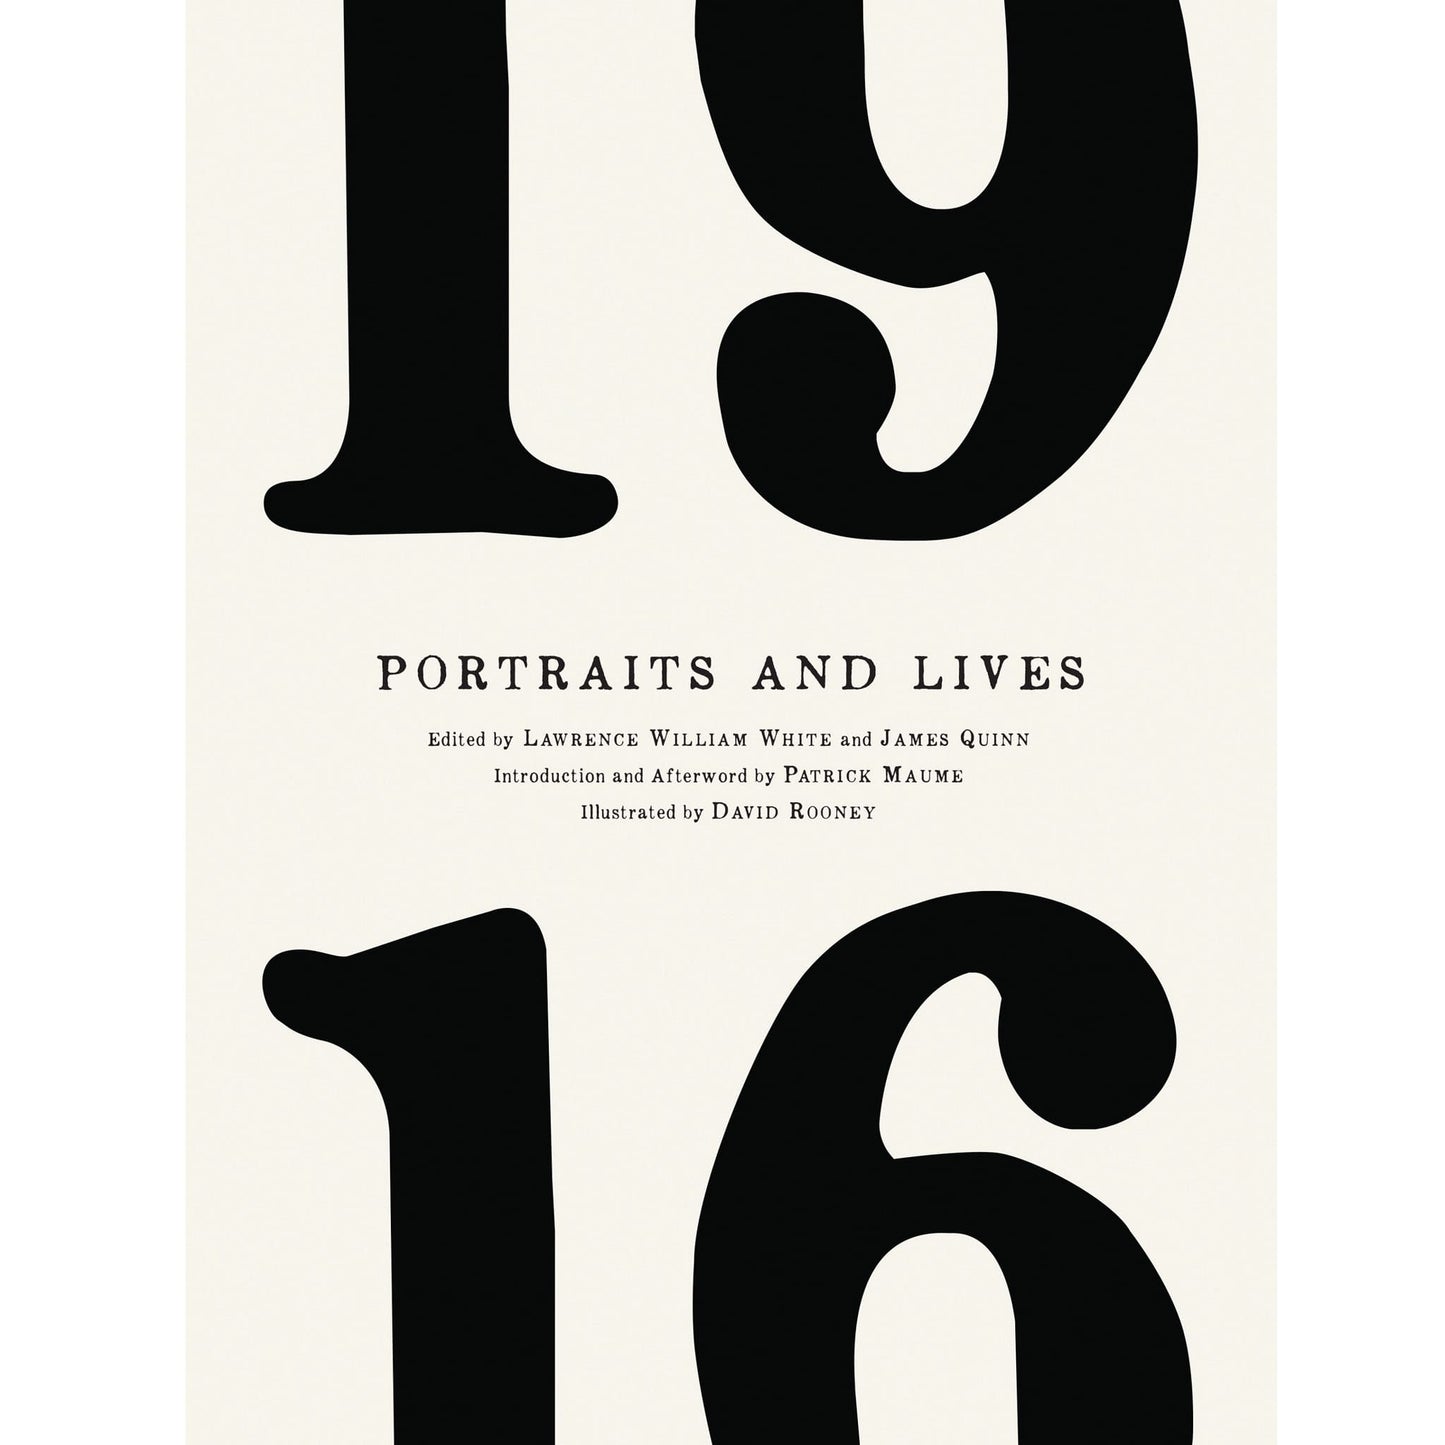 1916 portraits and lives cover